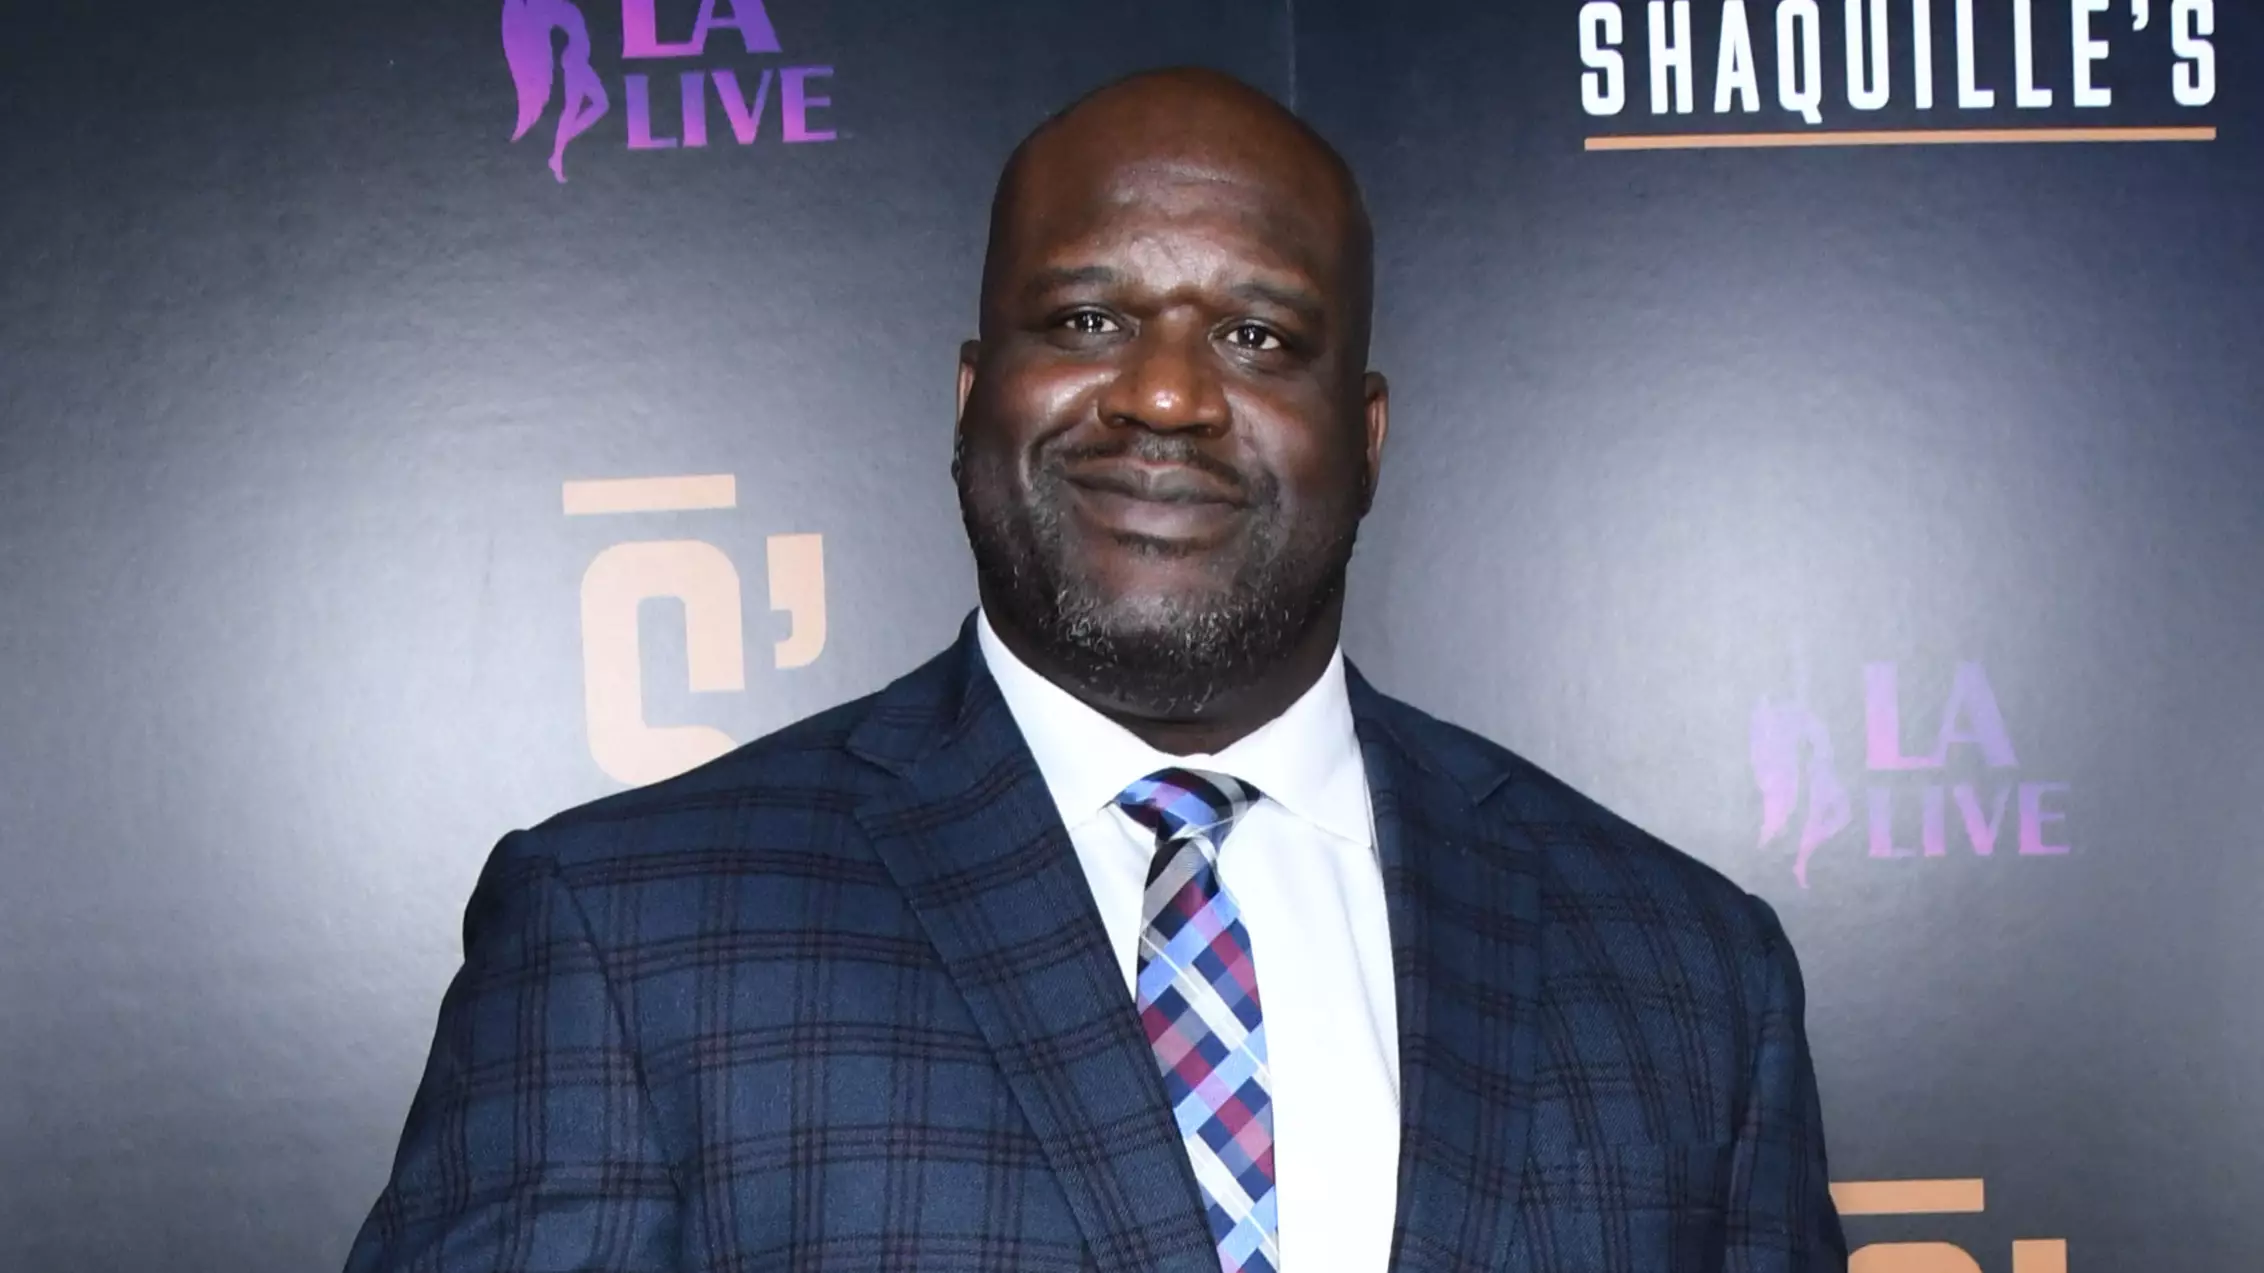 Man Says Shaquille O’Neal Bought Him A Laptop After He Passed On Condolences For Kobe Bryant 